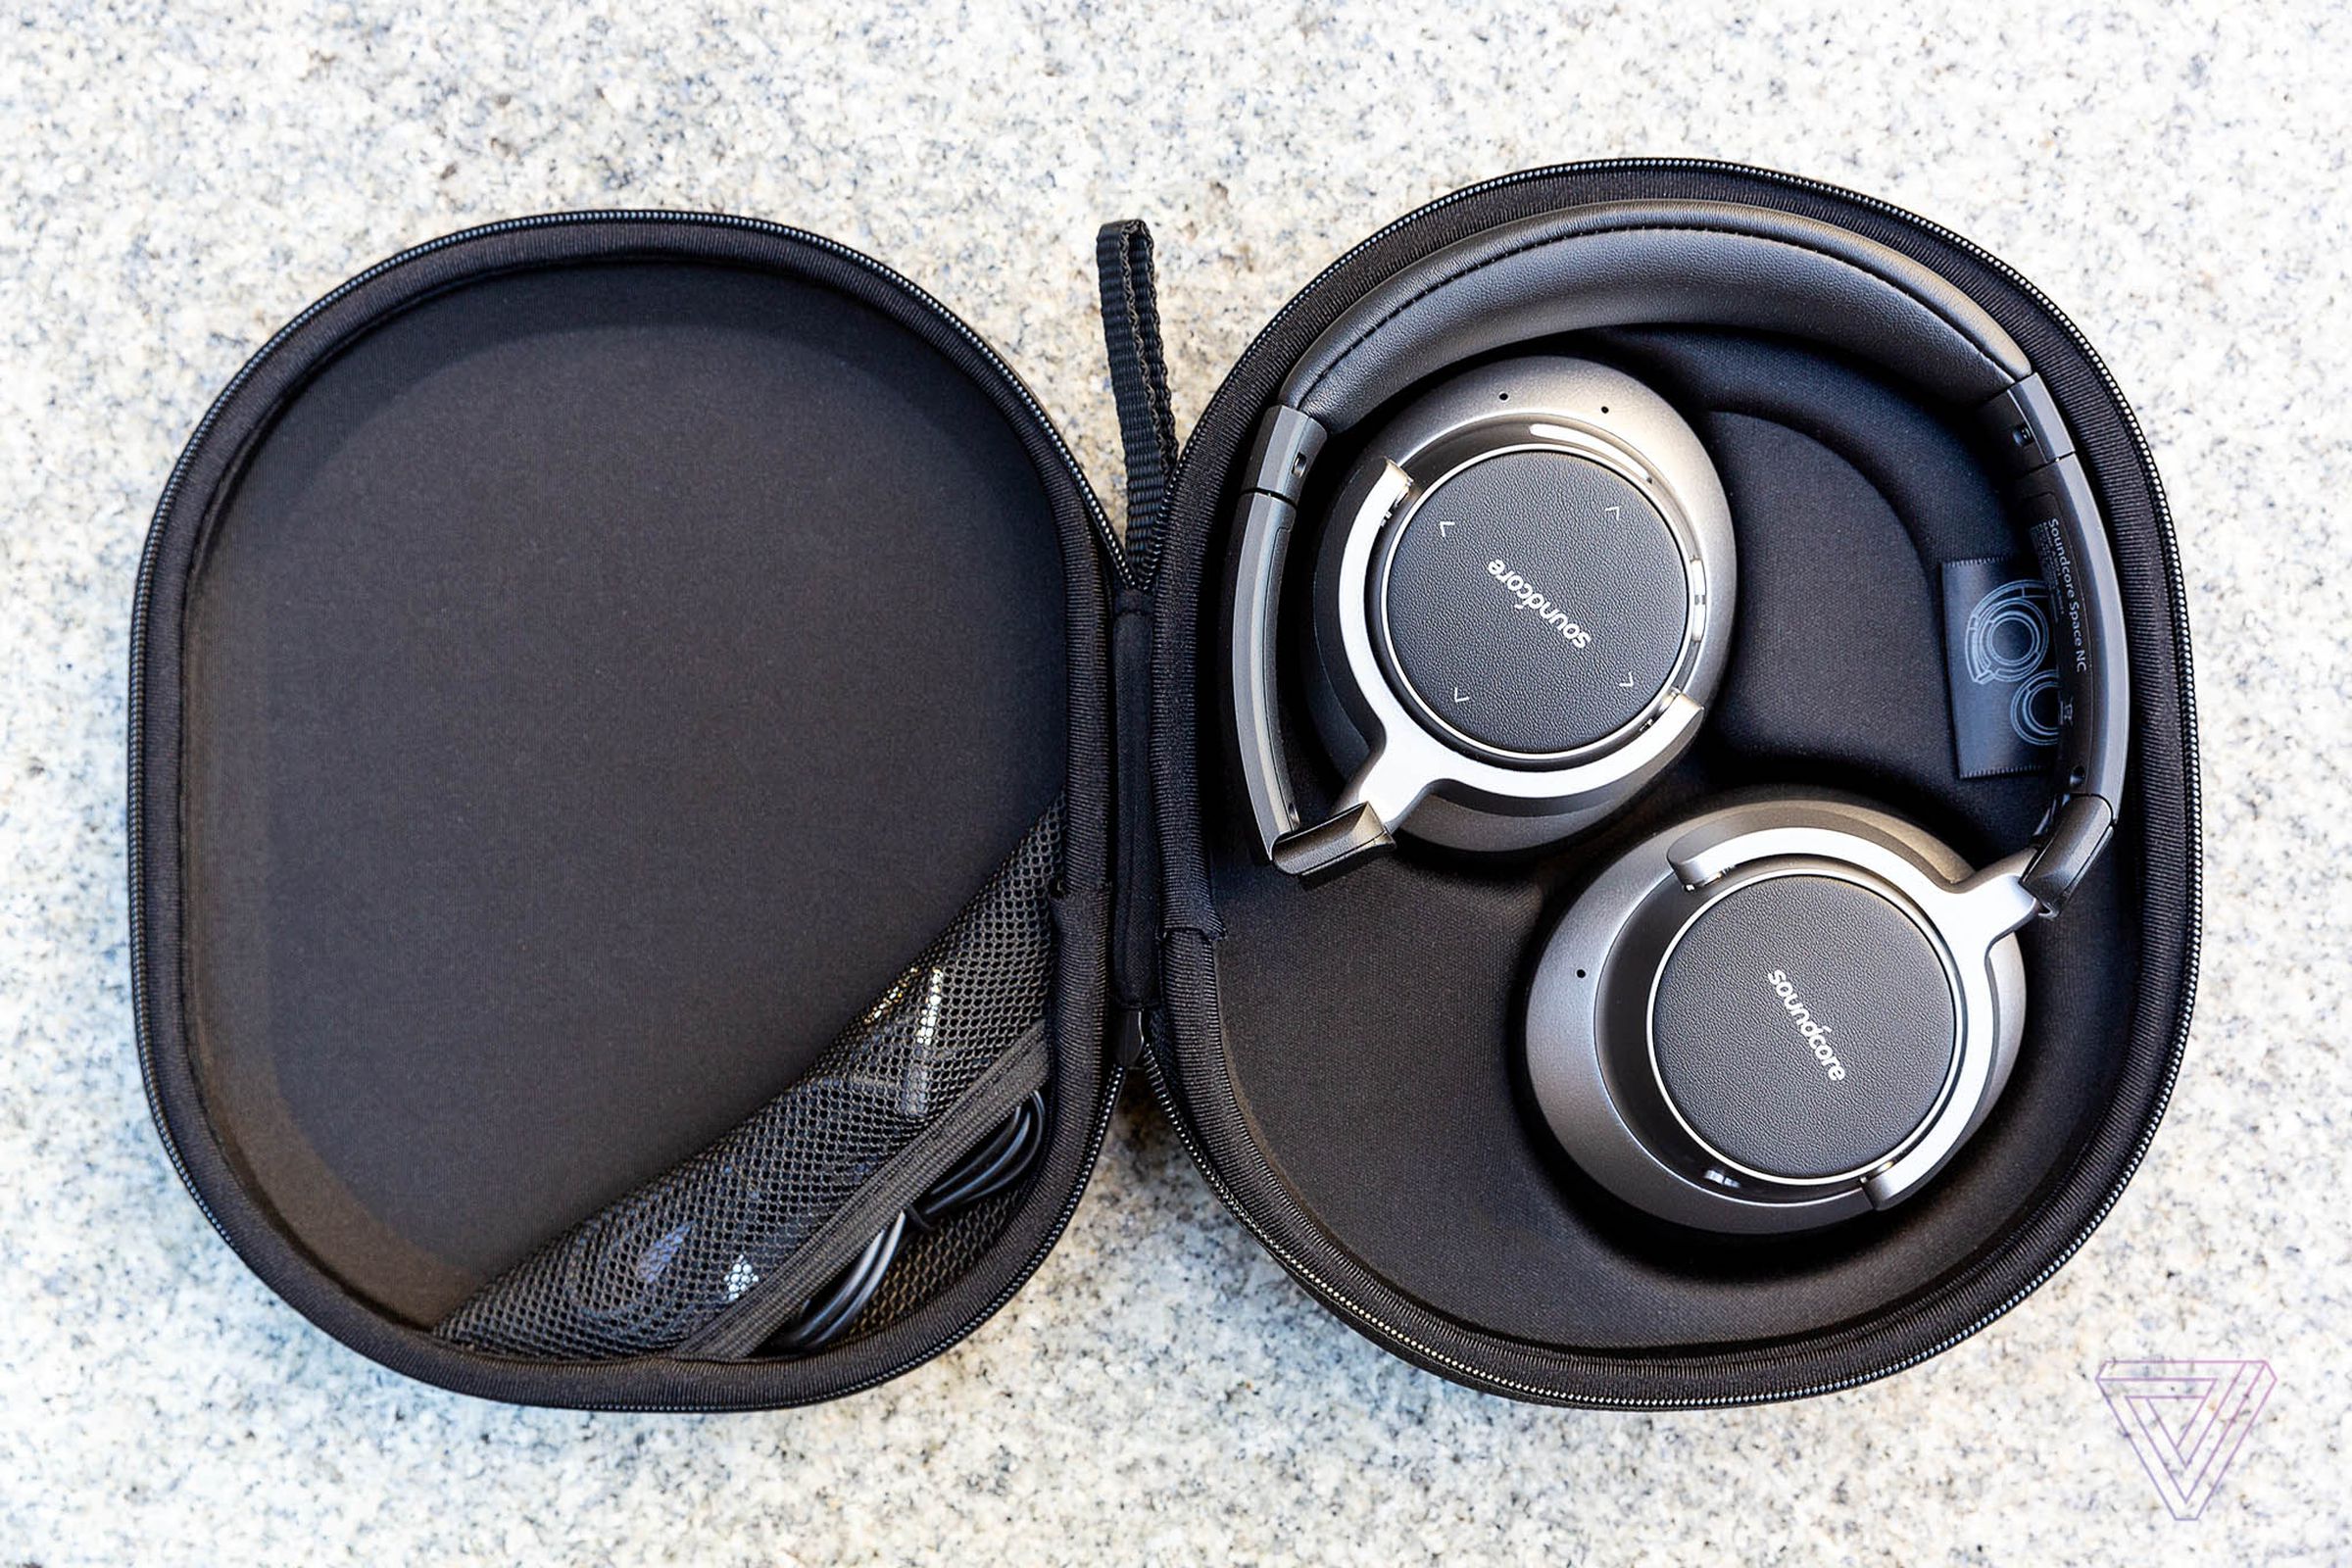 The Space NC headphones in their case.